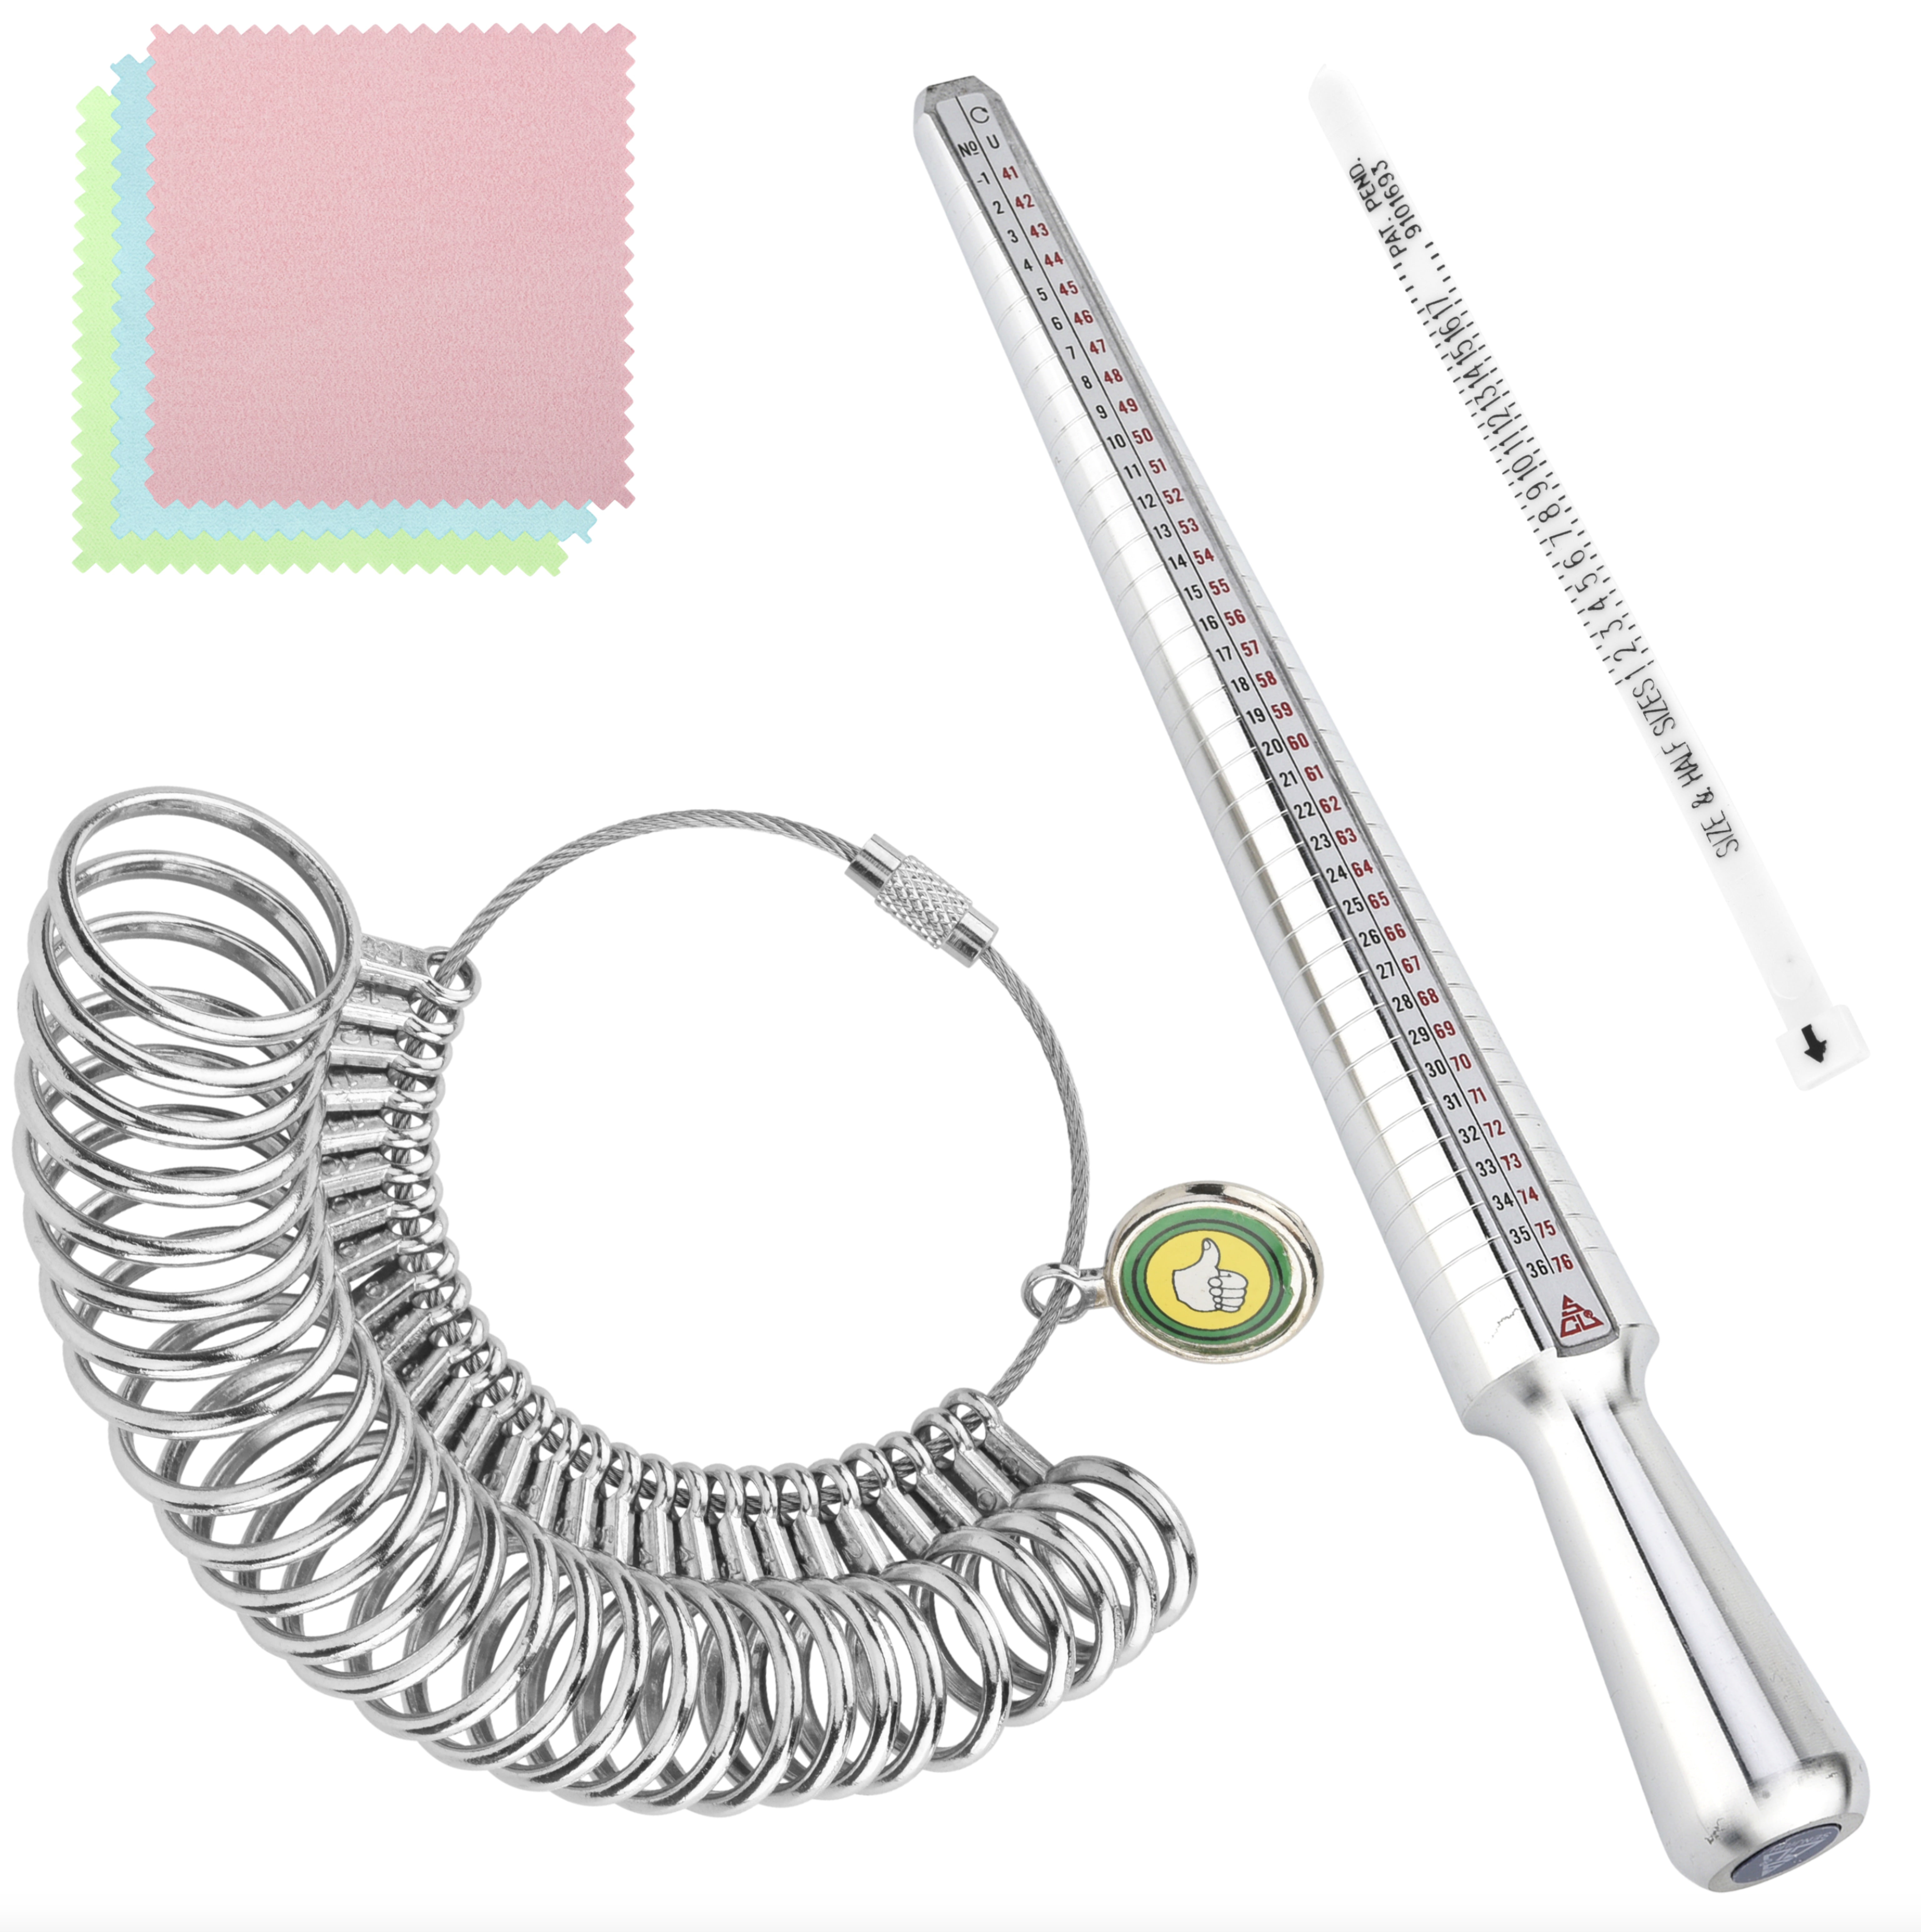 Mr. Pen- Ring Sizer Measuring Tool Set, Ring Sizer Guage & Plastic Ring  Mandrel with 1 Polishing Cloth, Ring Sizer, Ring Measure for Fingers, Ring